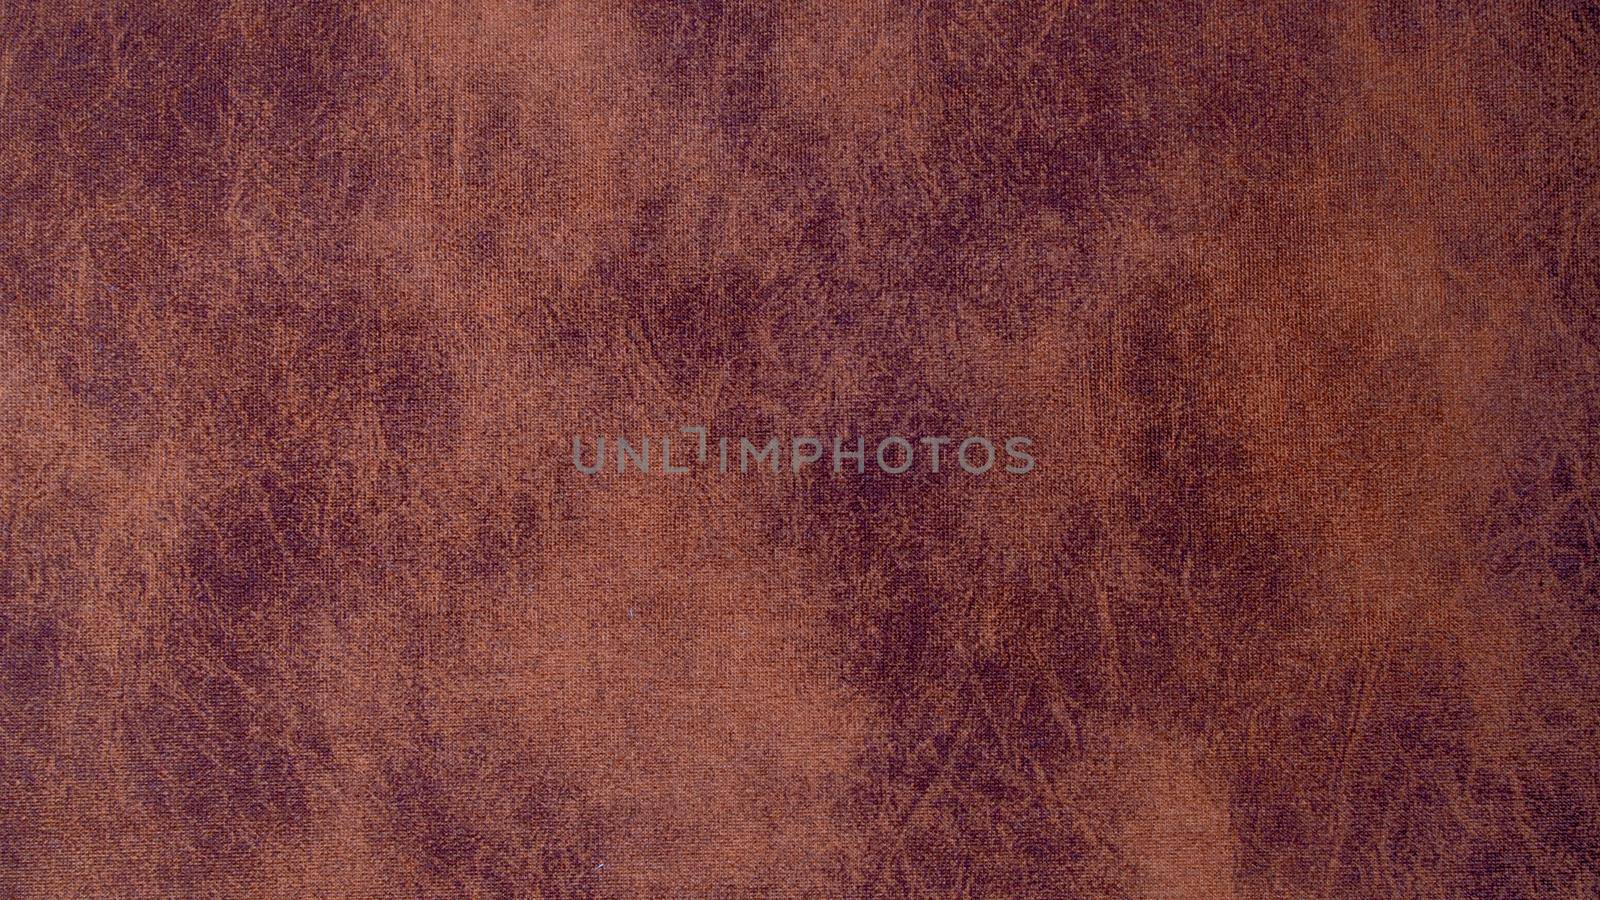 Background texture orange red fabric upholstery furniture. High quality photo